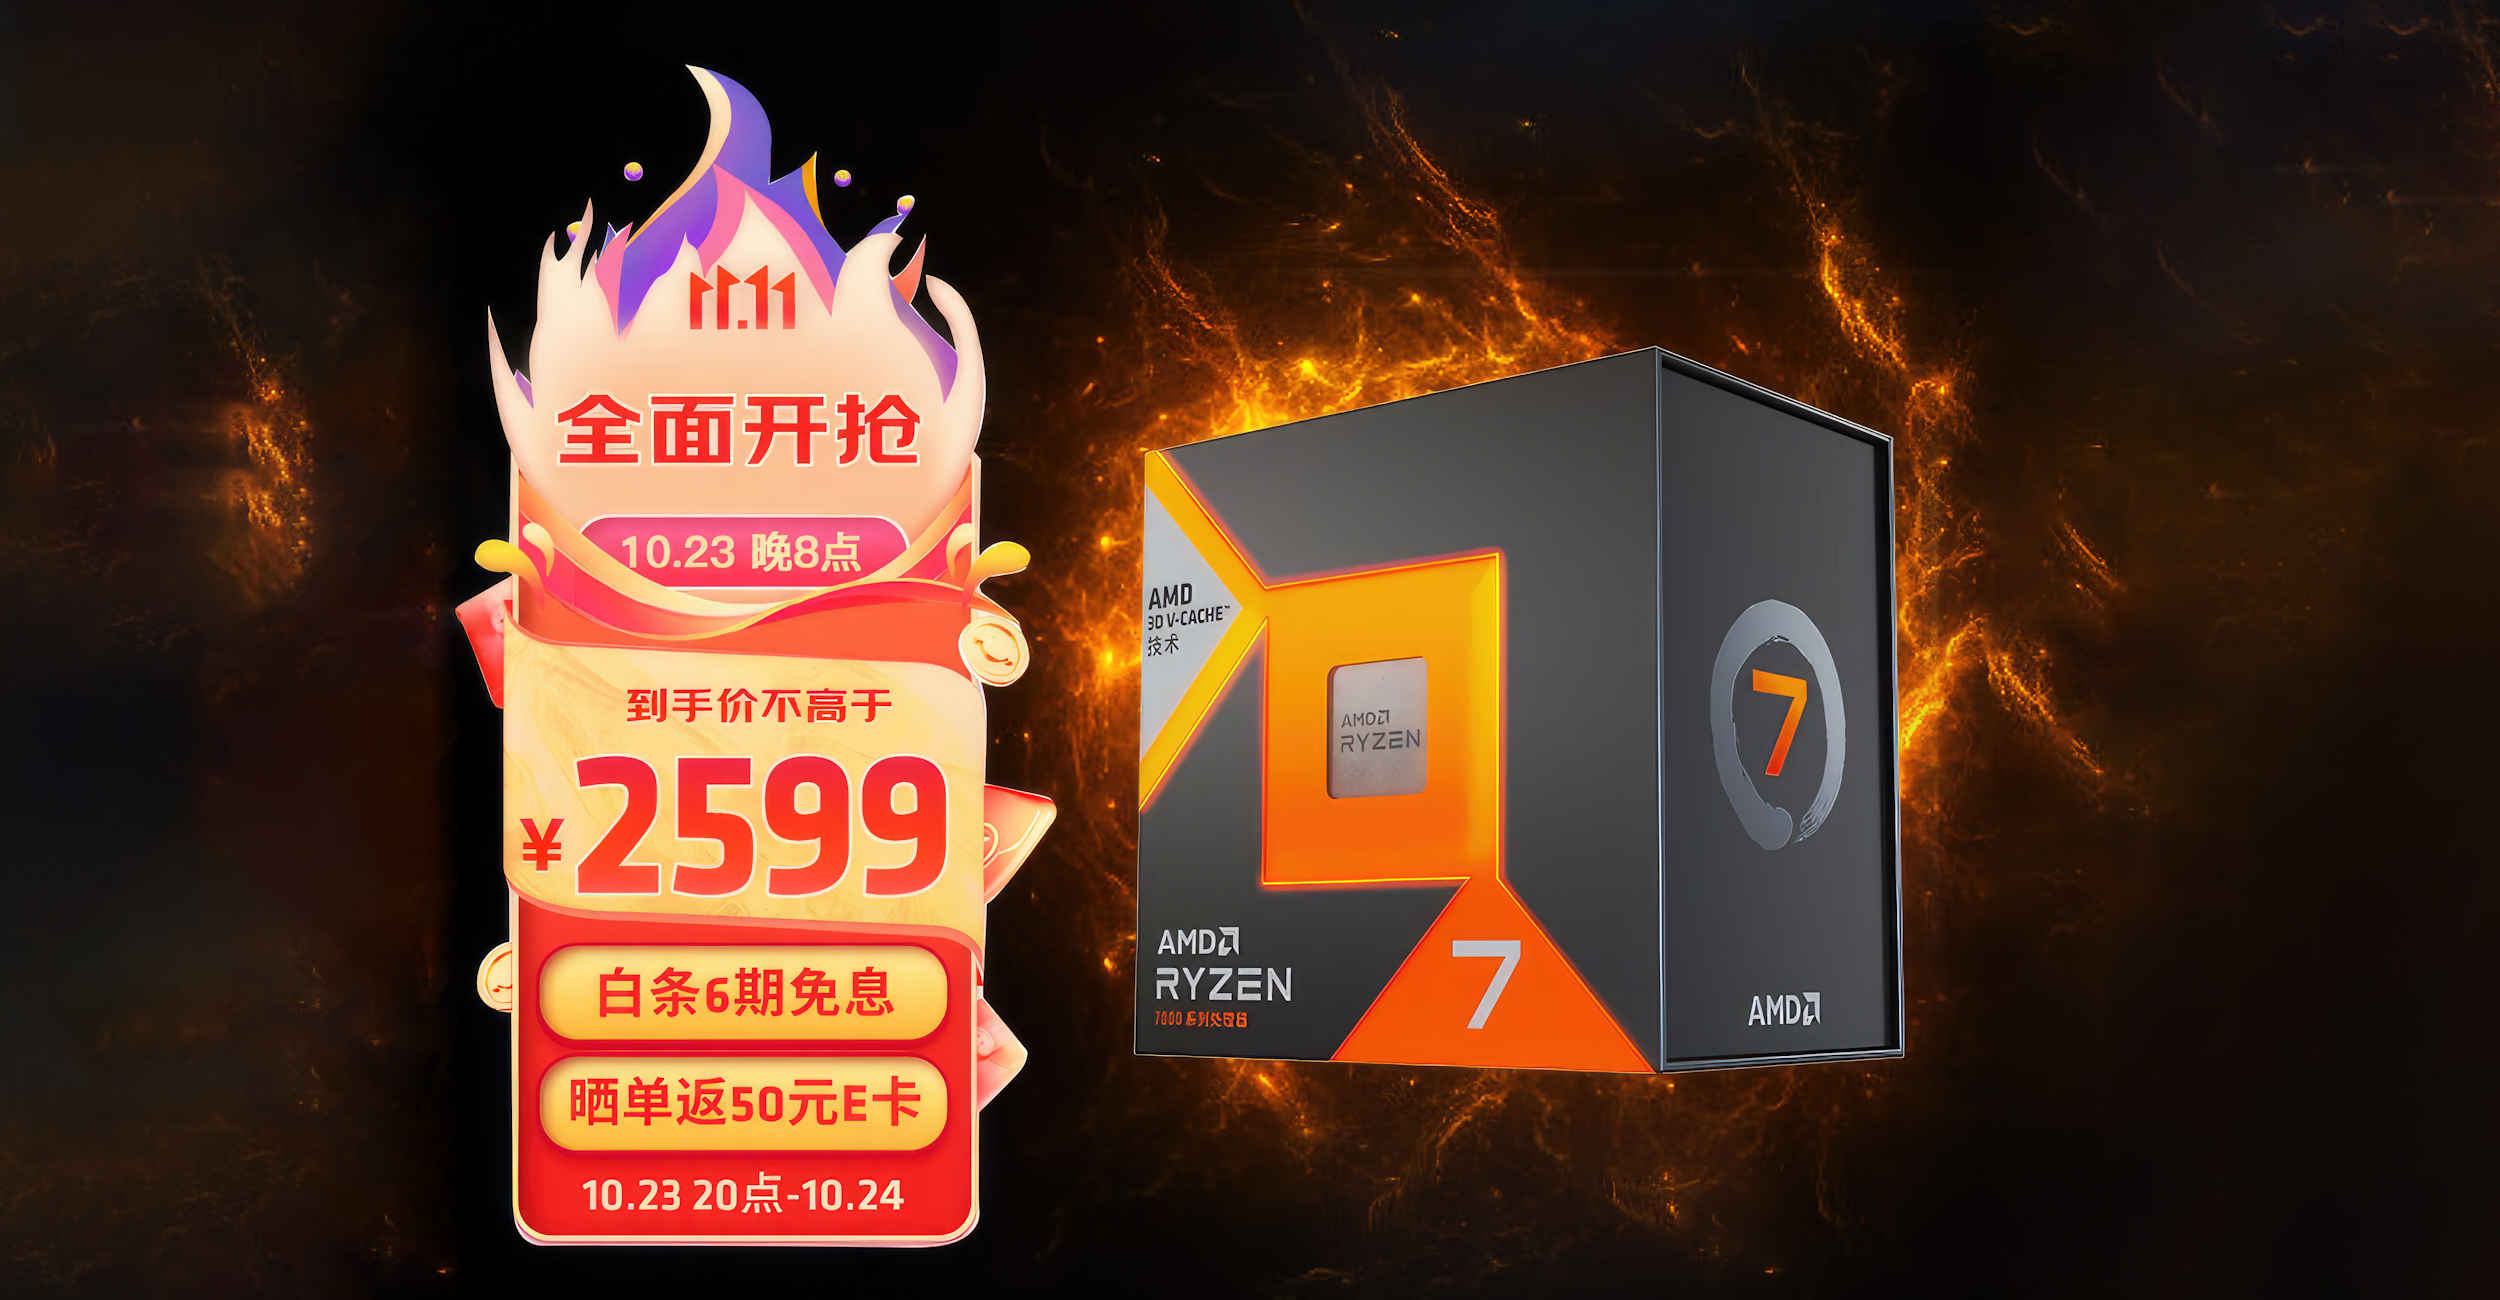 AMD Ryzen 7 7800X3D is again available for less than $349 